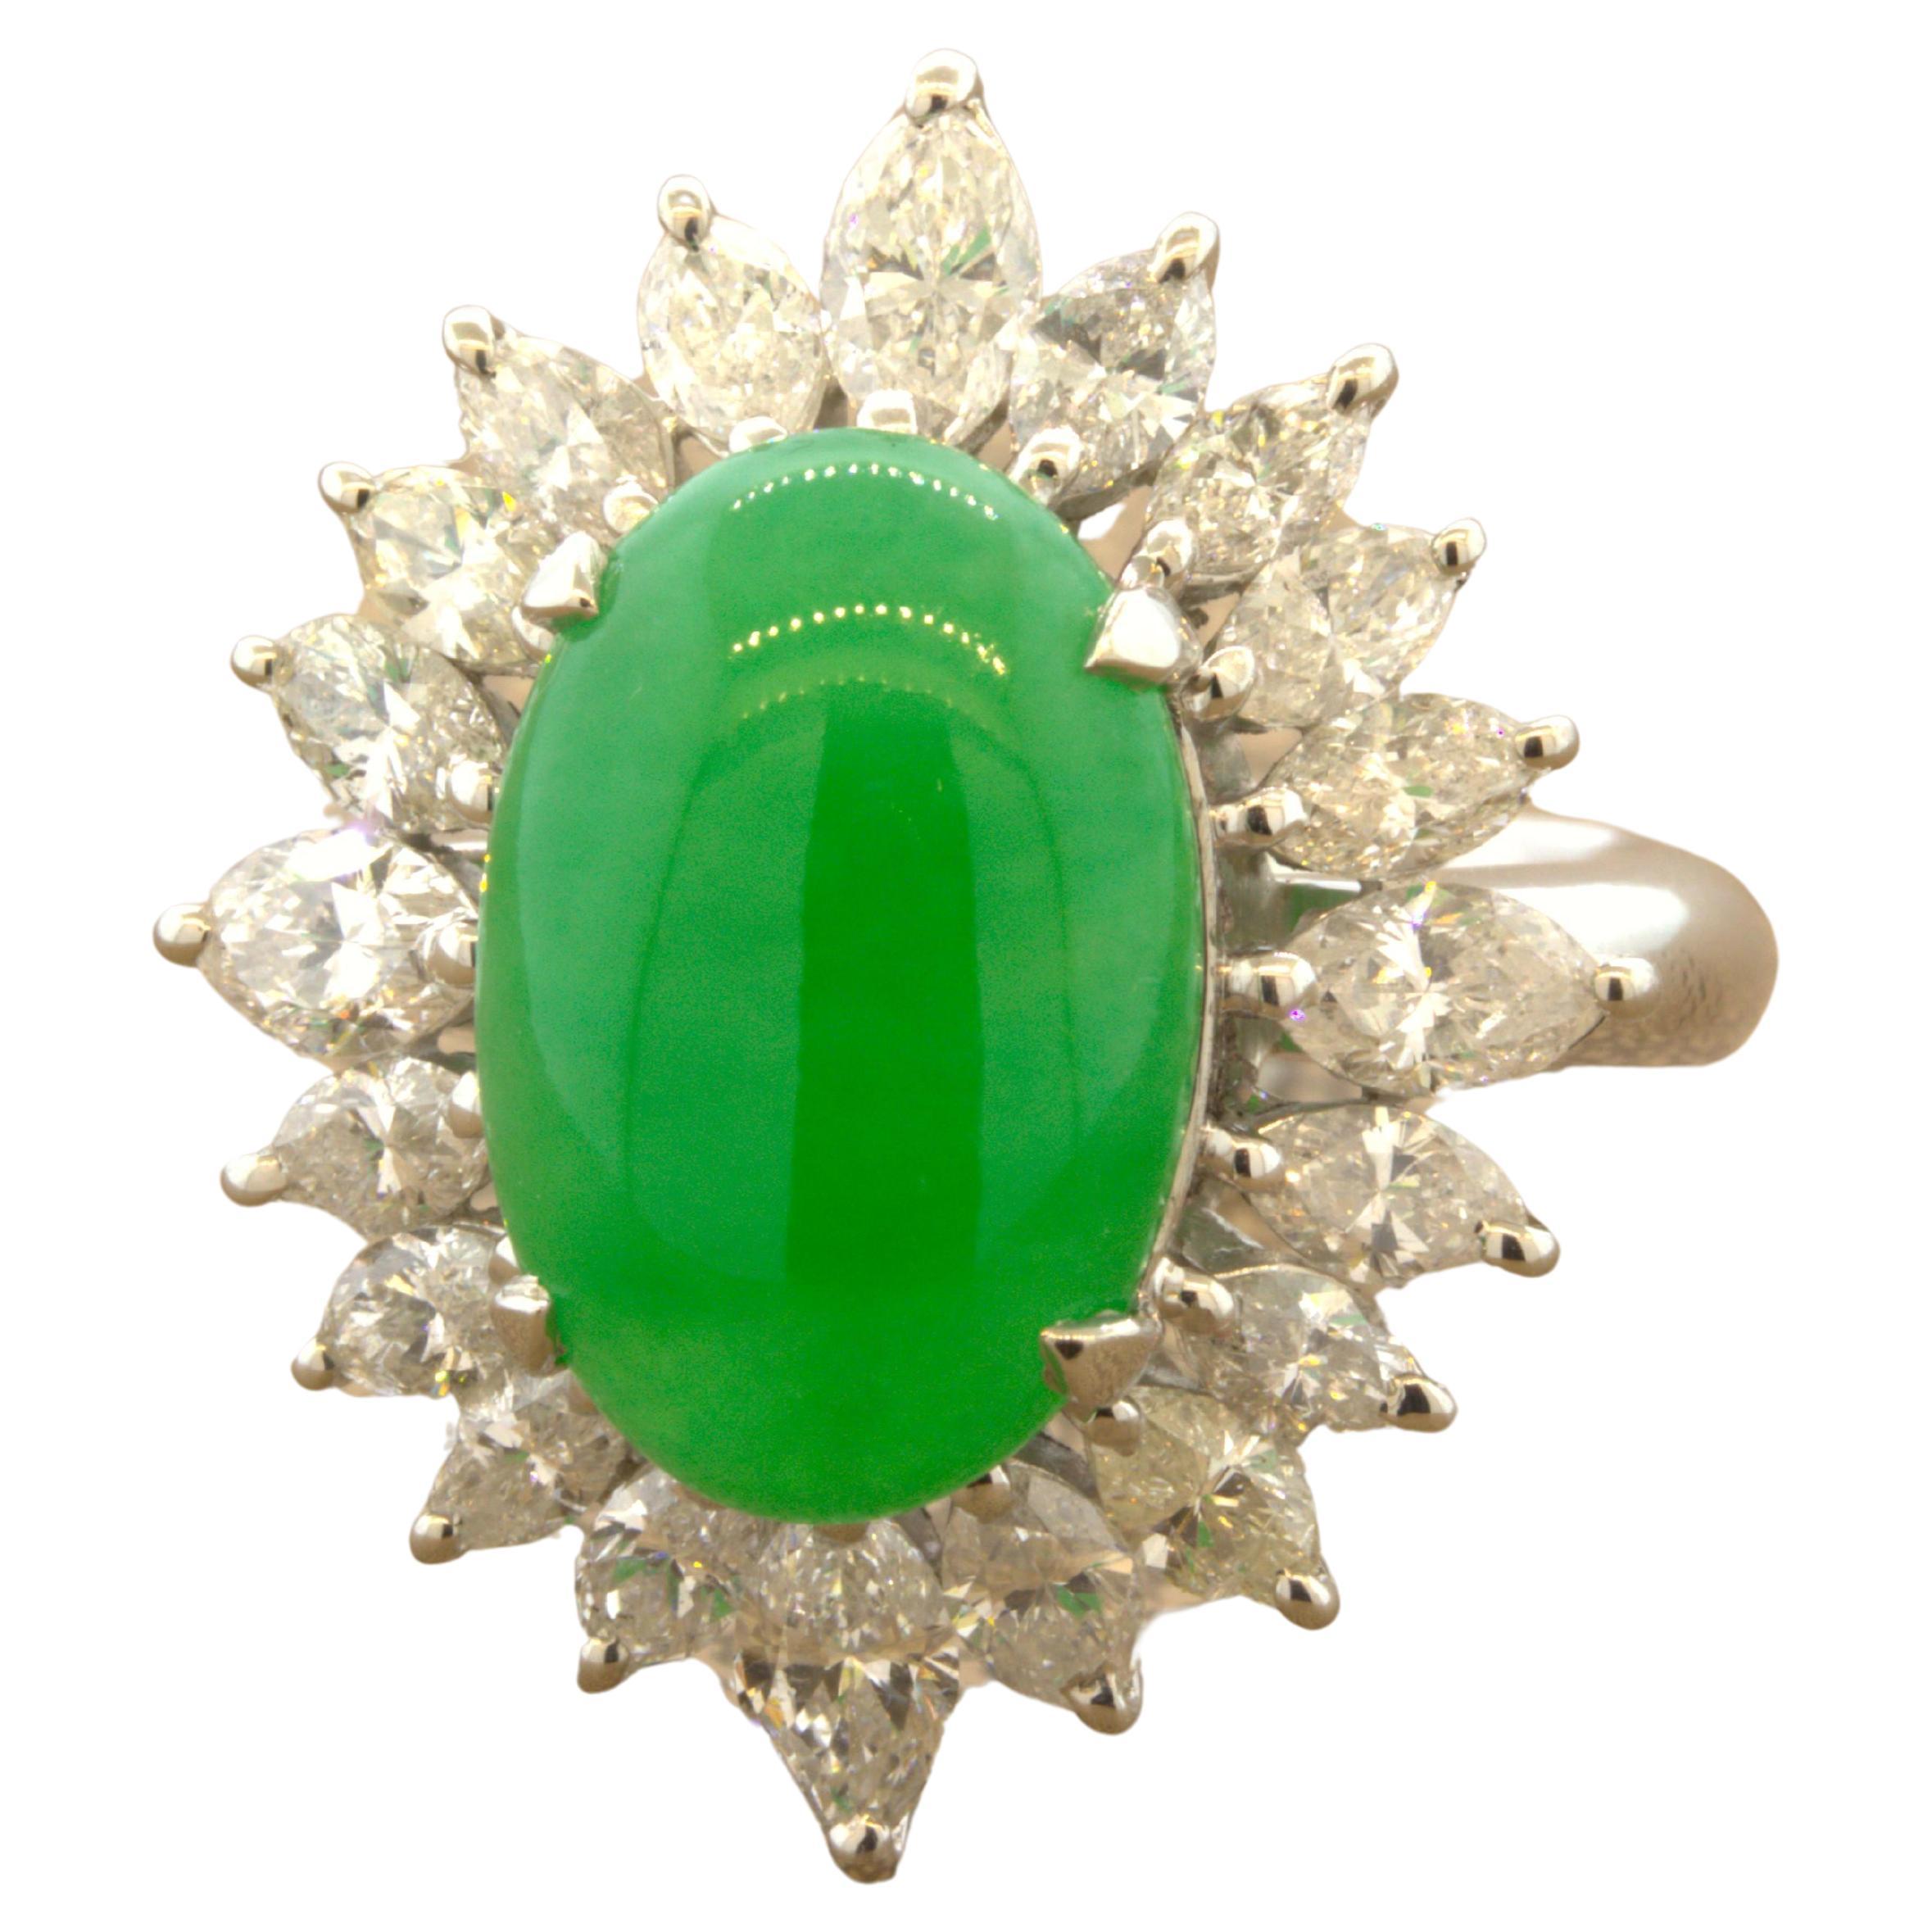 A fine gemmy piece of natural jadeite jade takes center stage. It weighs 5.47 carats and has an ideal bright vivid green color along with an even color and strong luster as light rolls across the stone. It is surrounded by 2.14 carats of